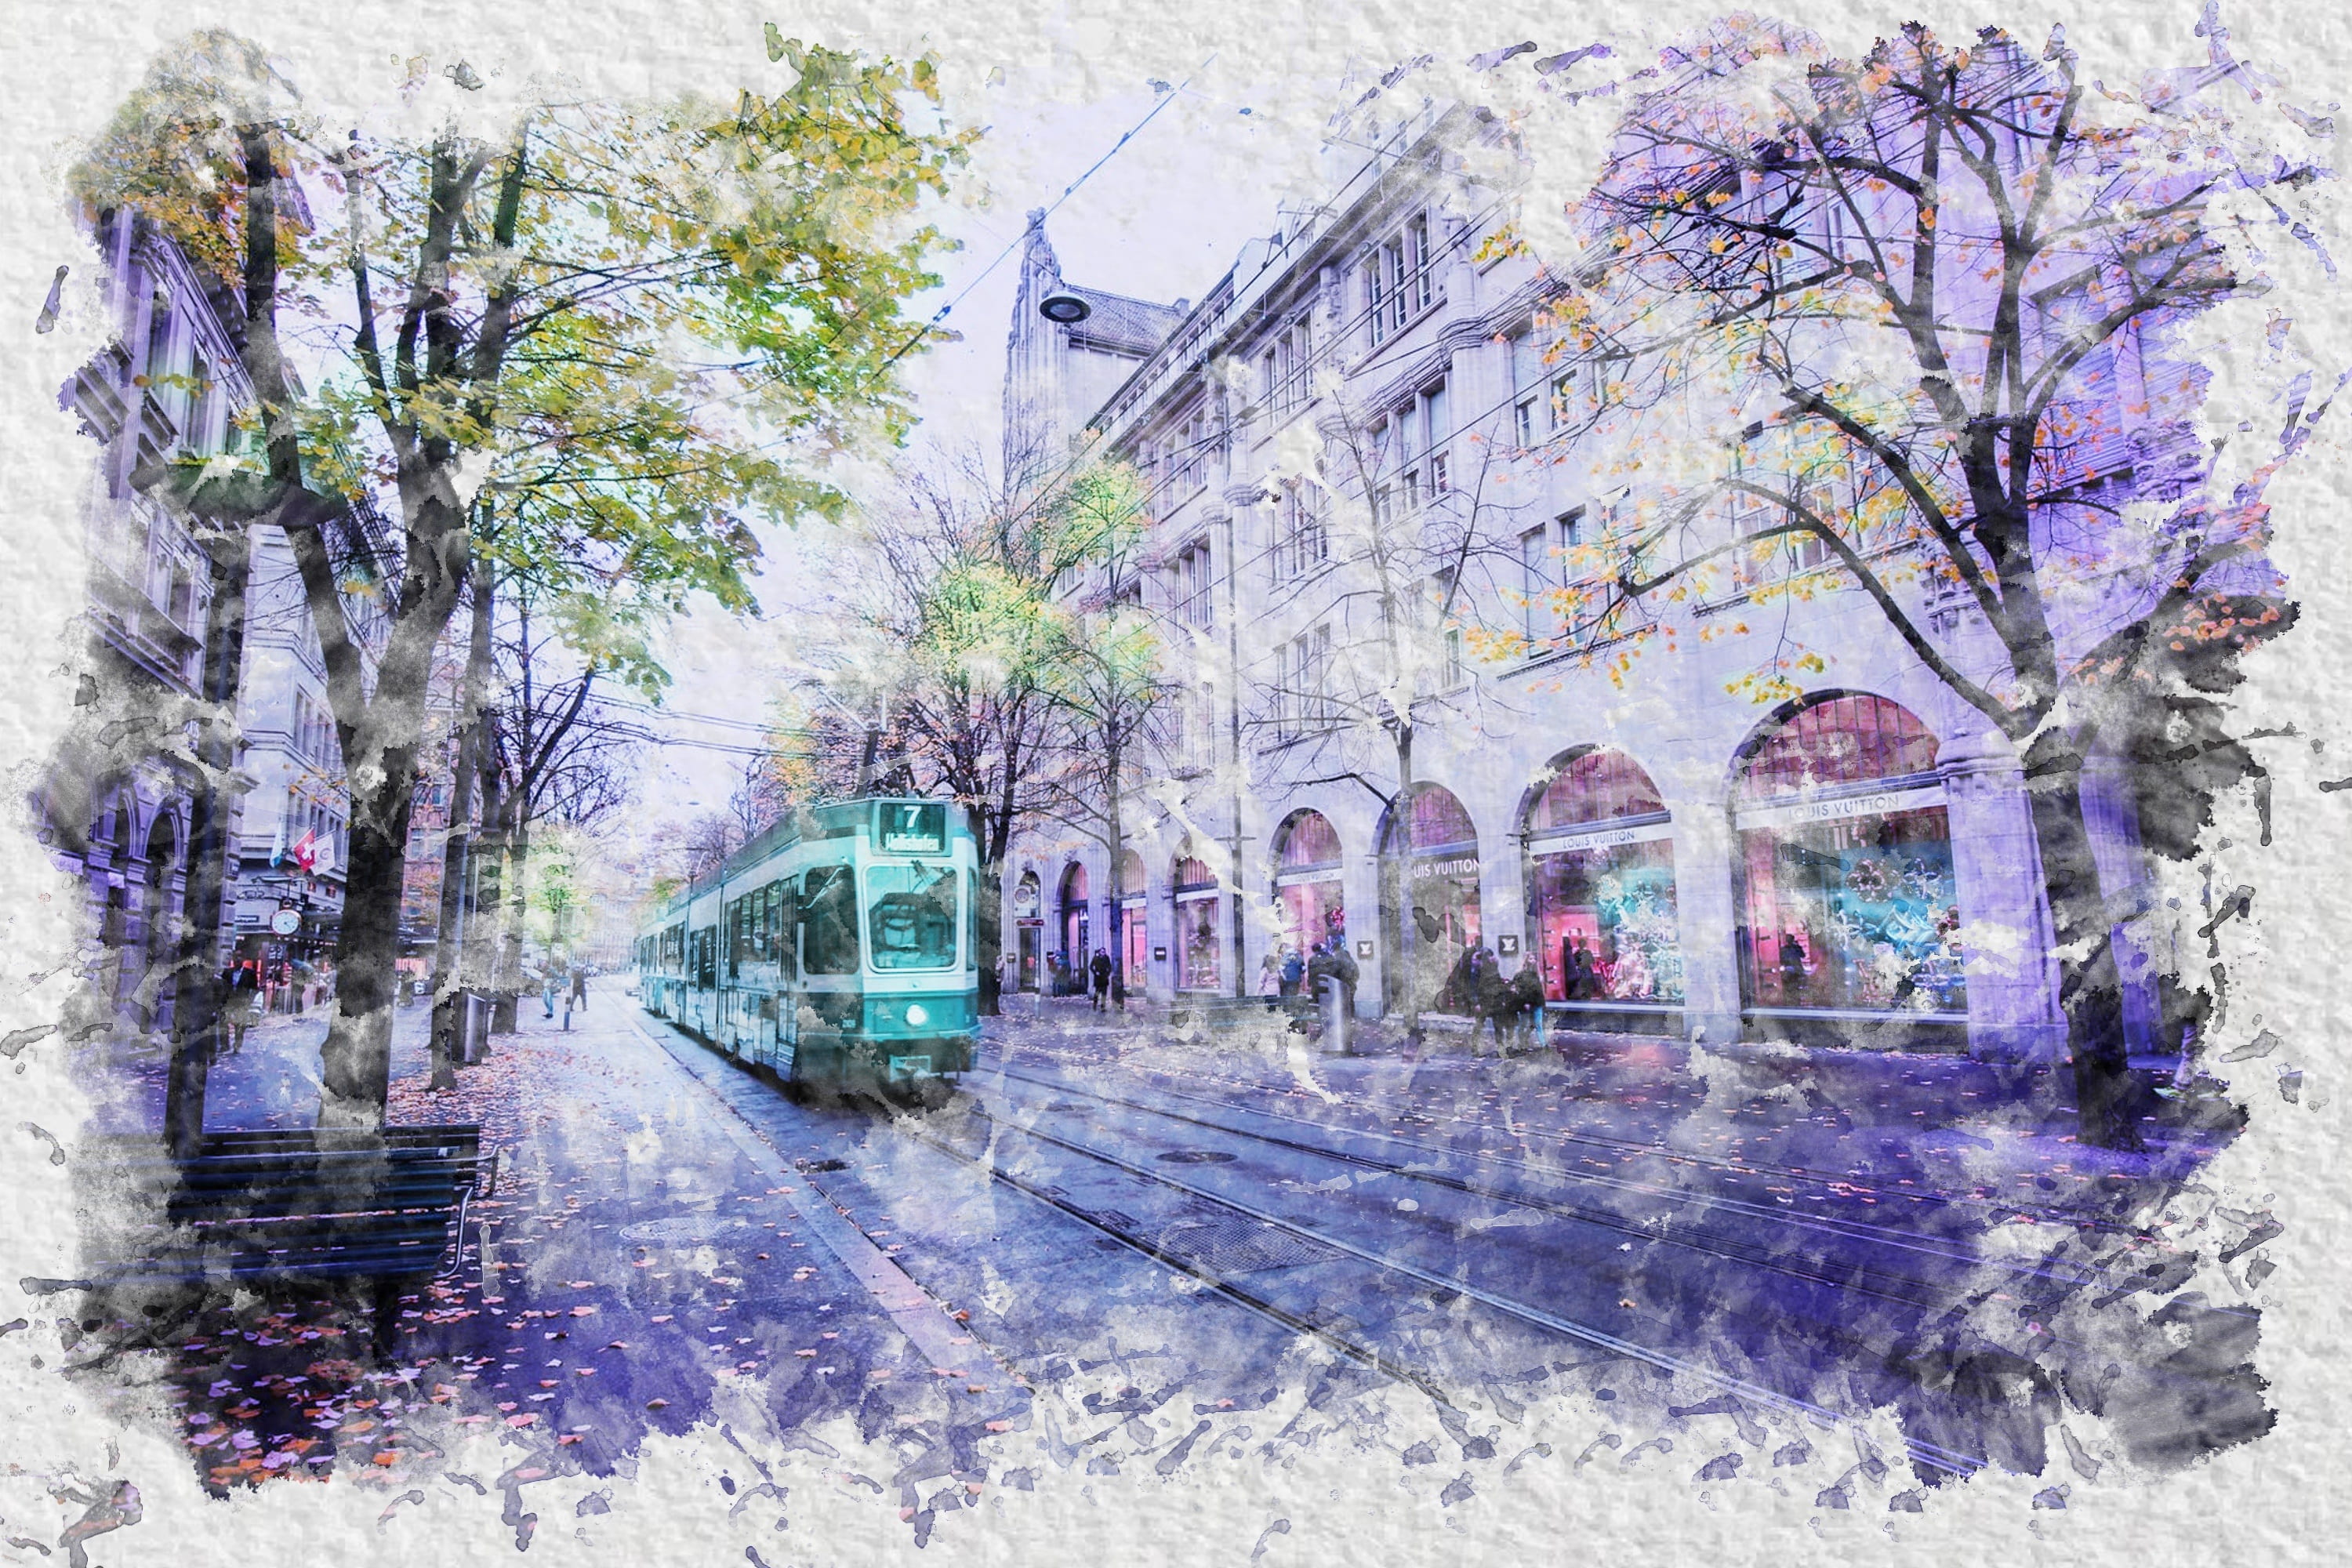 painting of city tram on street, watercolor, building, architecture